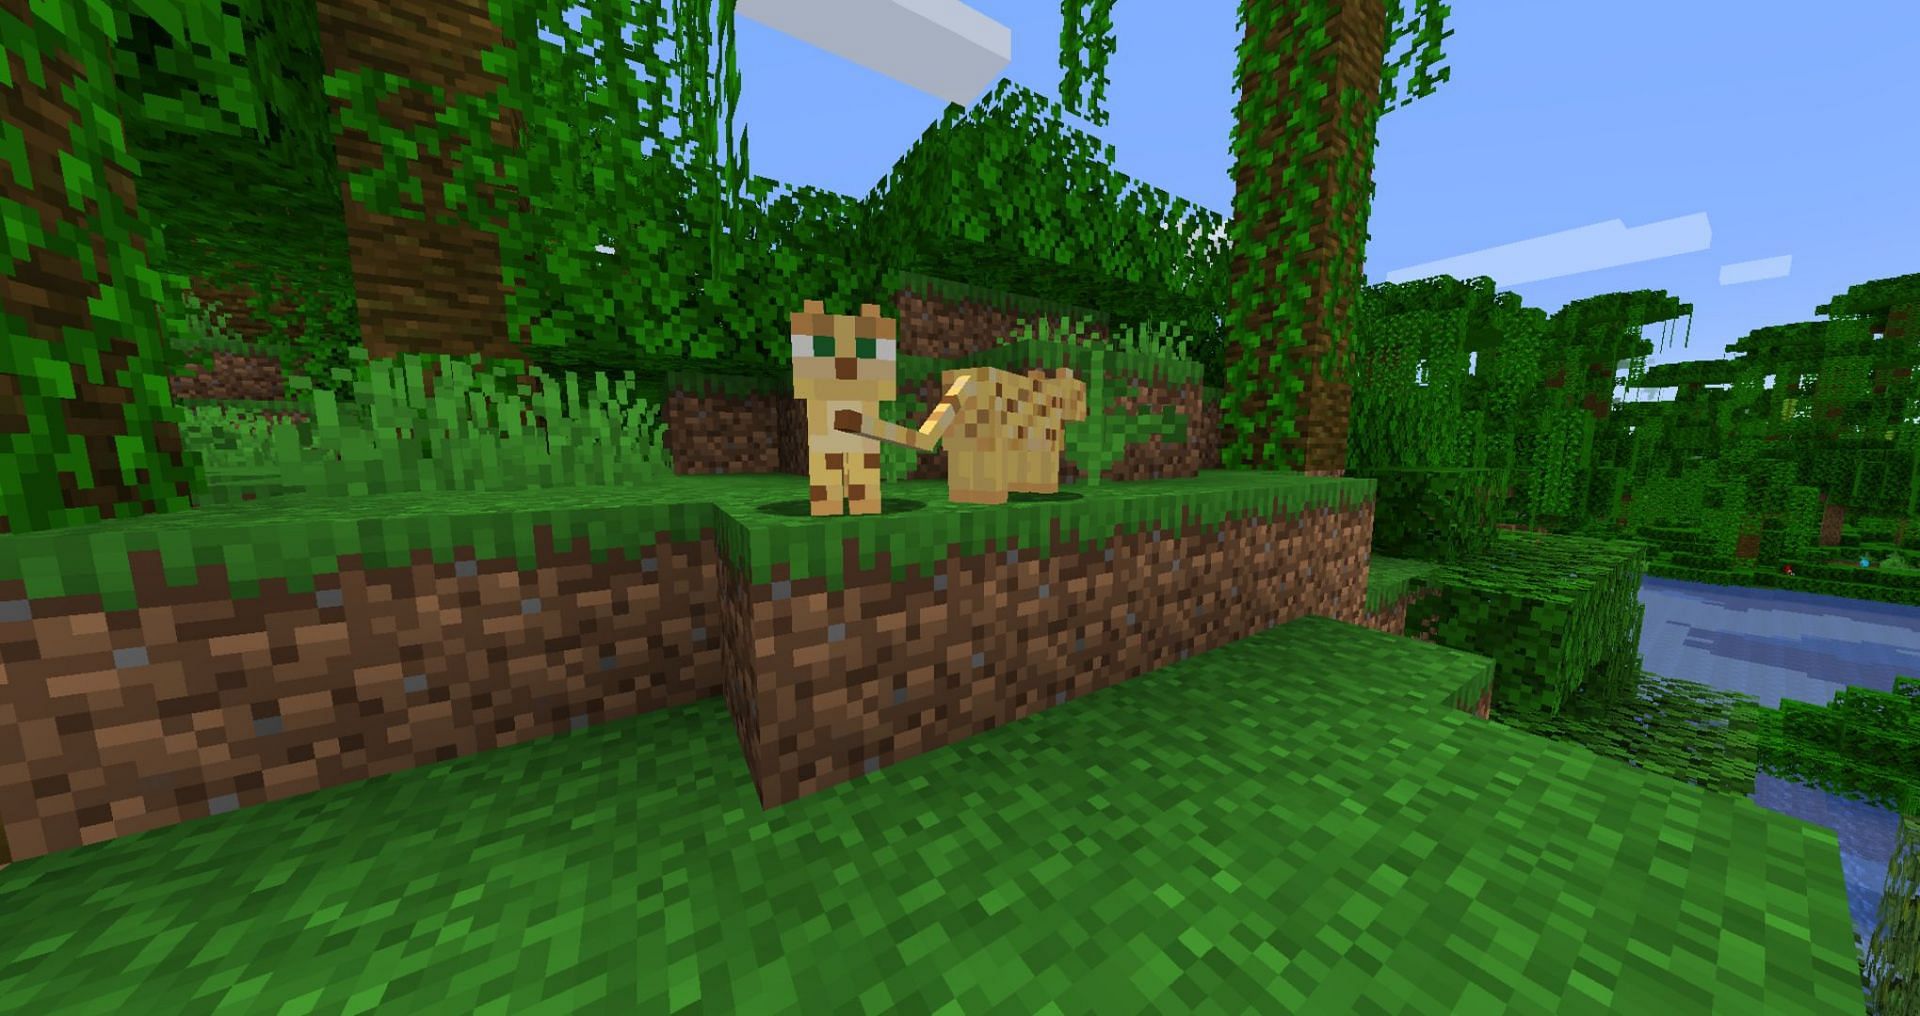 Wild ocelots in their home jungle biome (Image via Mojang)